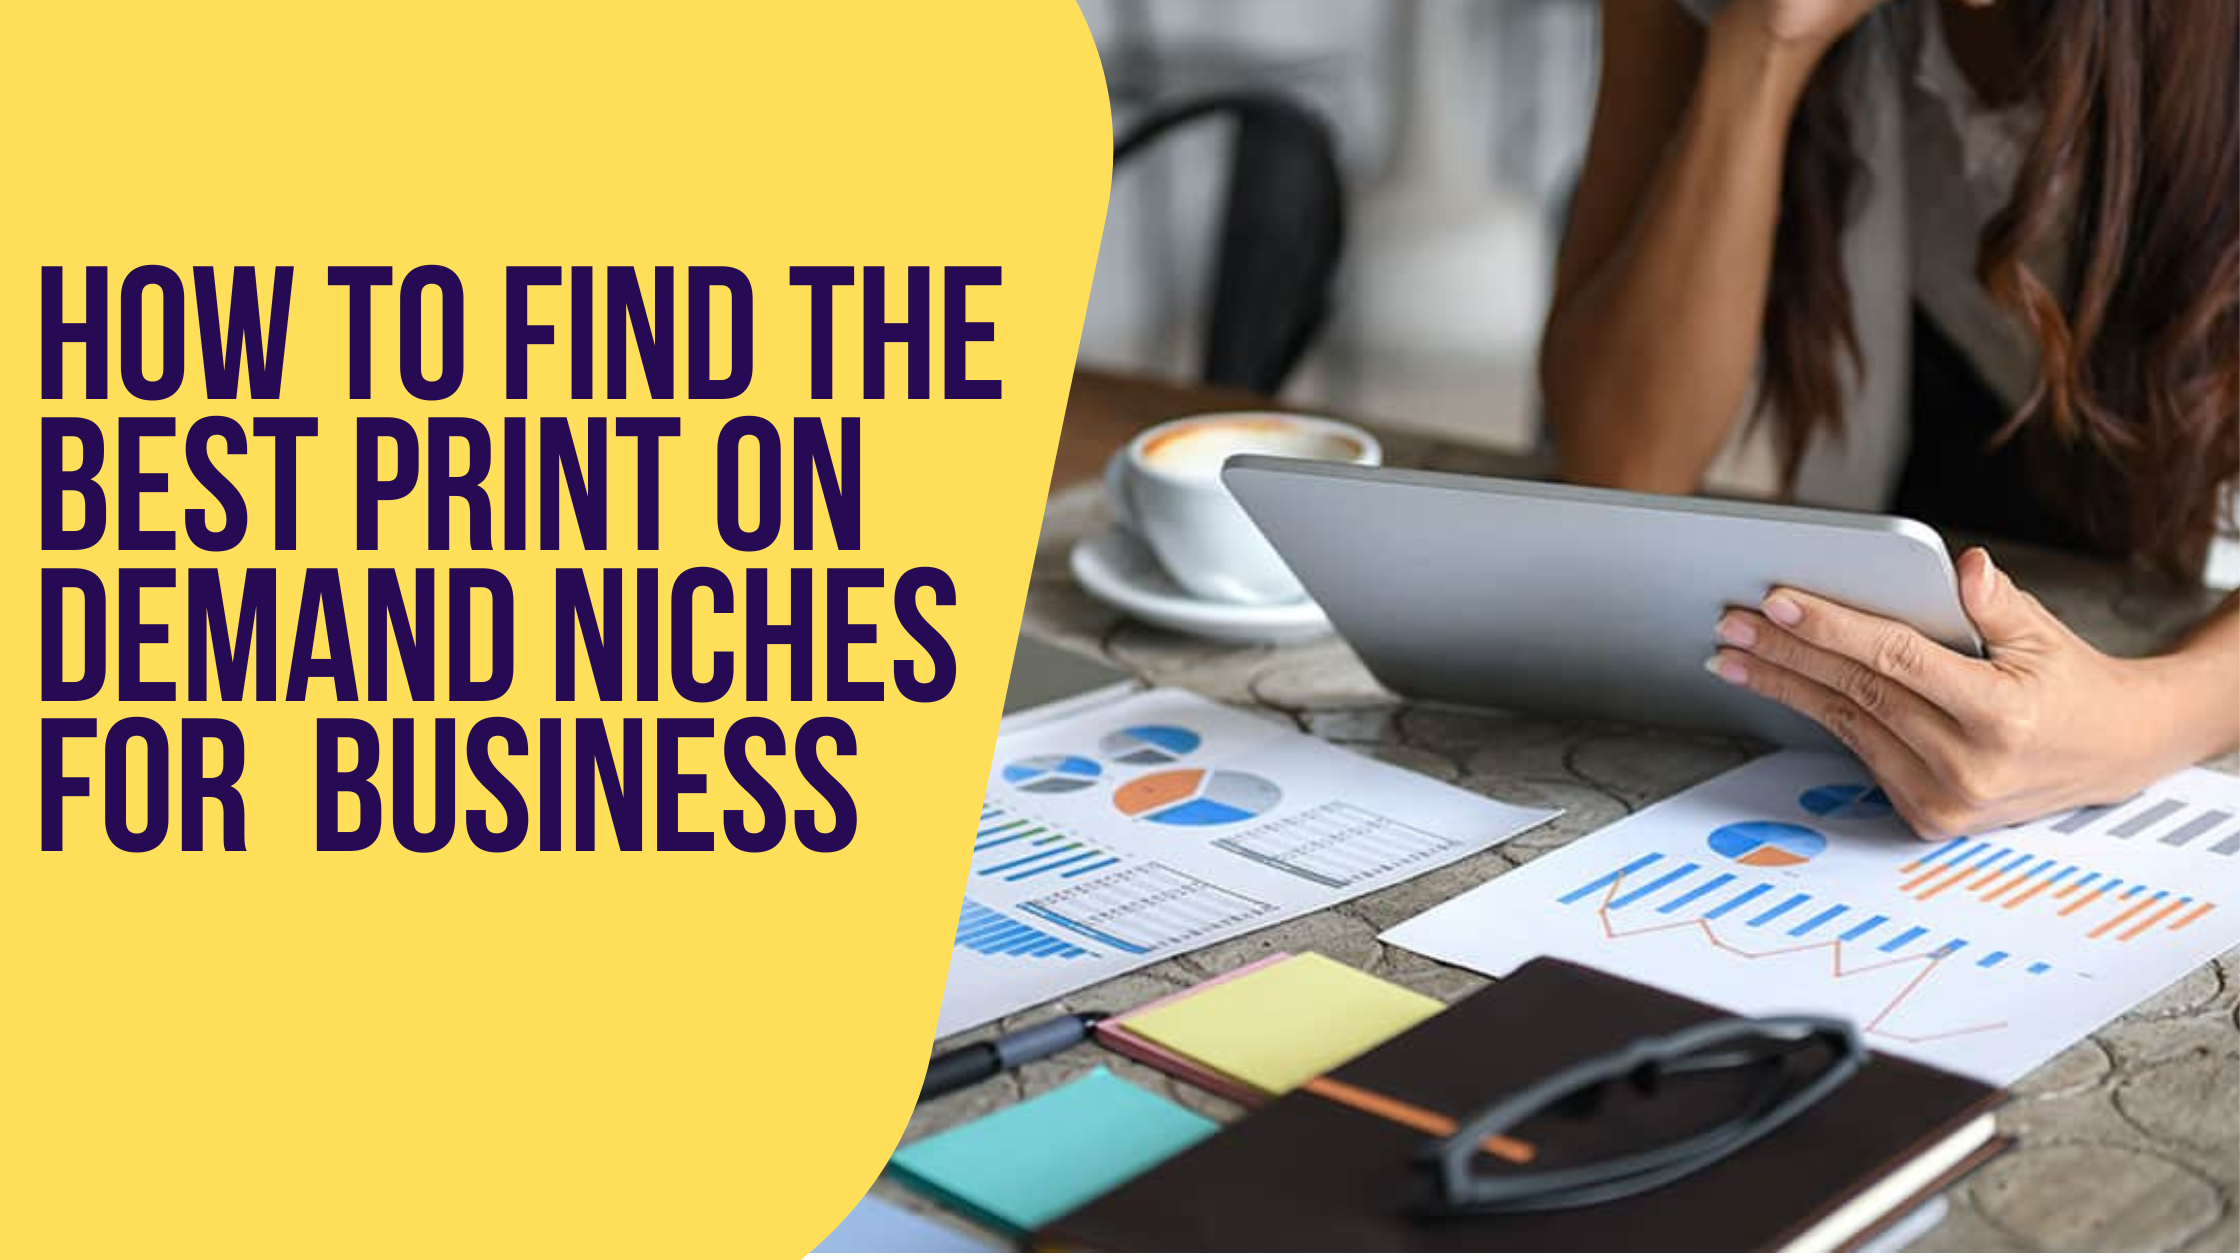 How to Find the Best Print on Demand Niches for Your Business